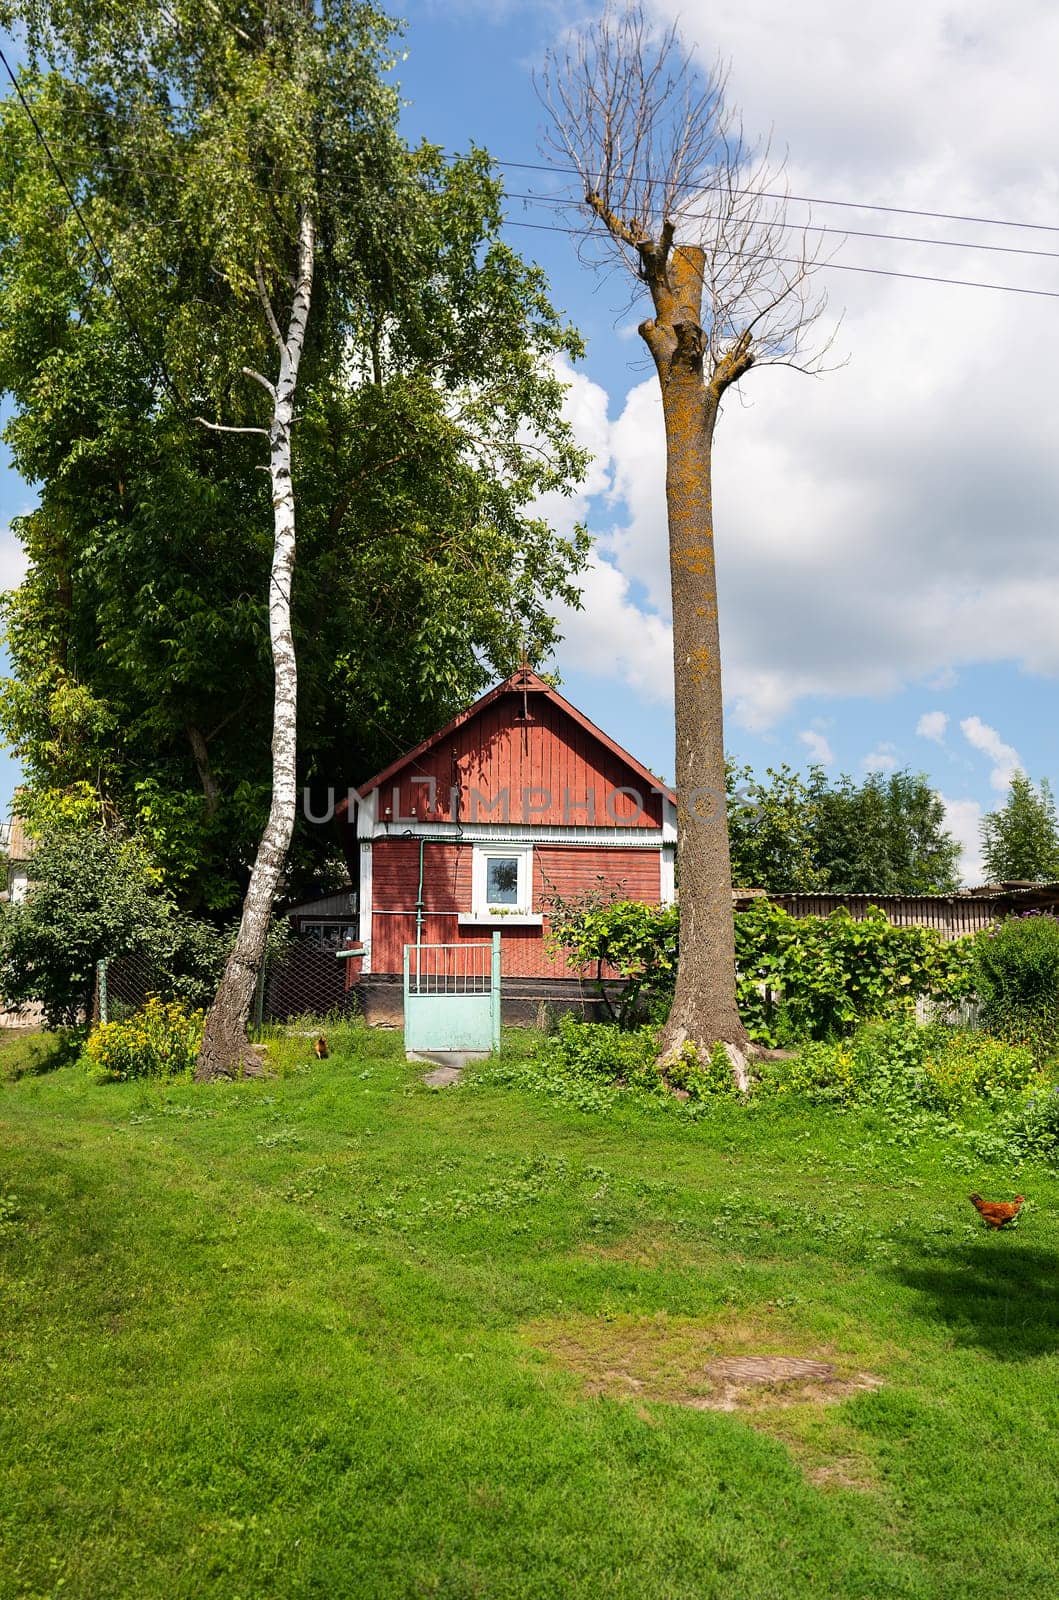 A charming red wooden shed amidst greenery under a clear sky. Rustic, serene, rural landscape